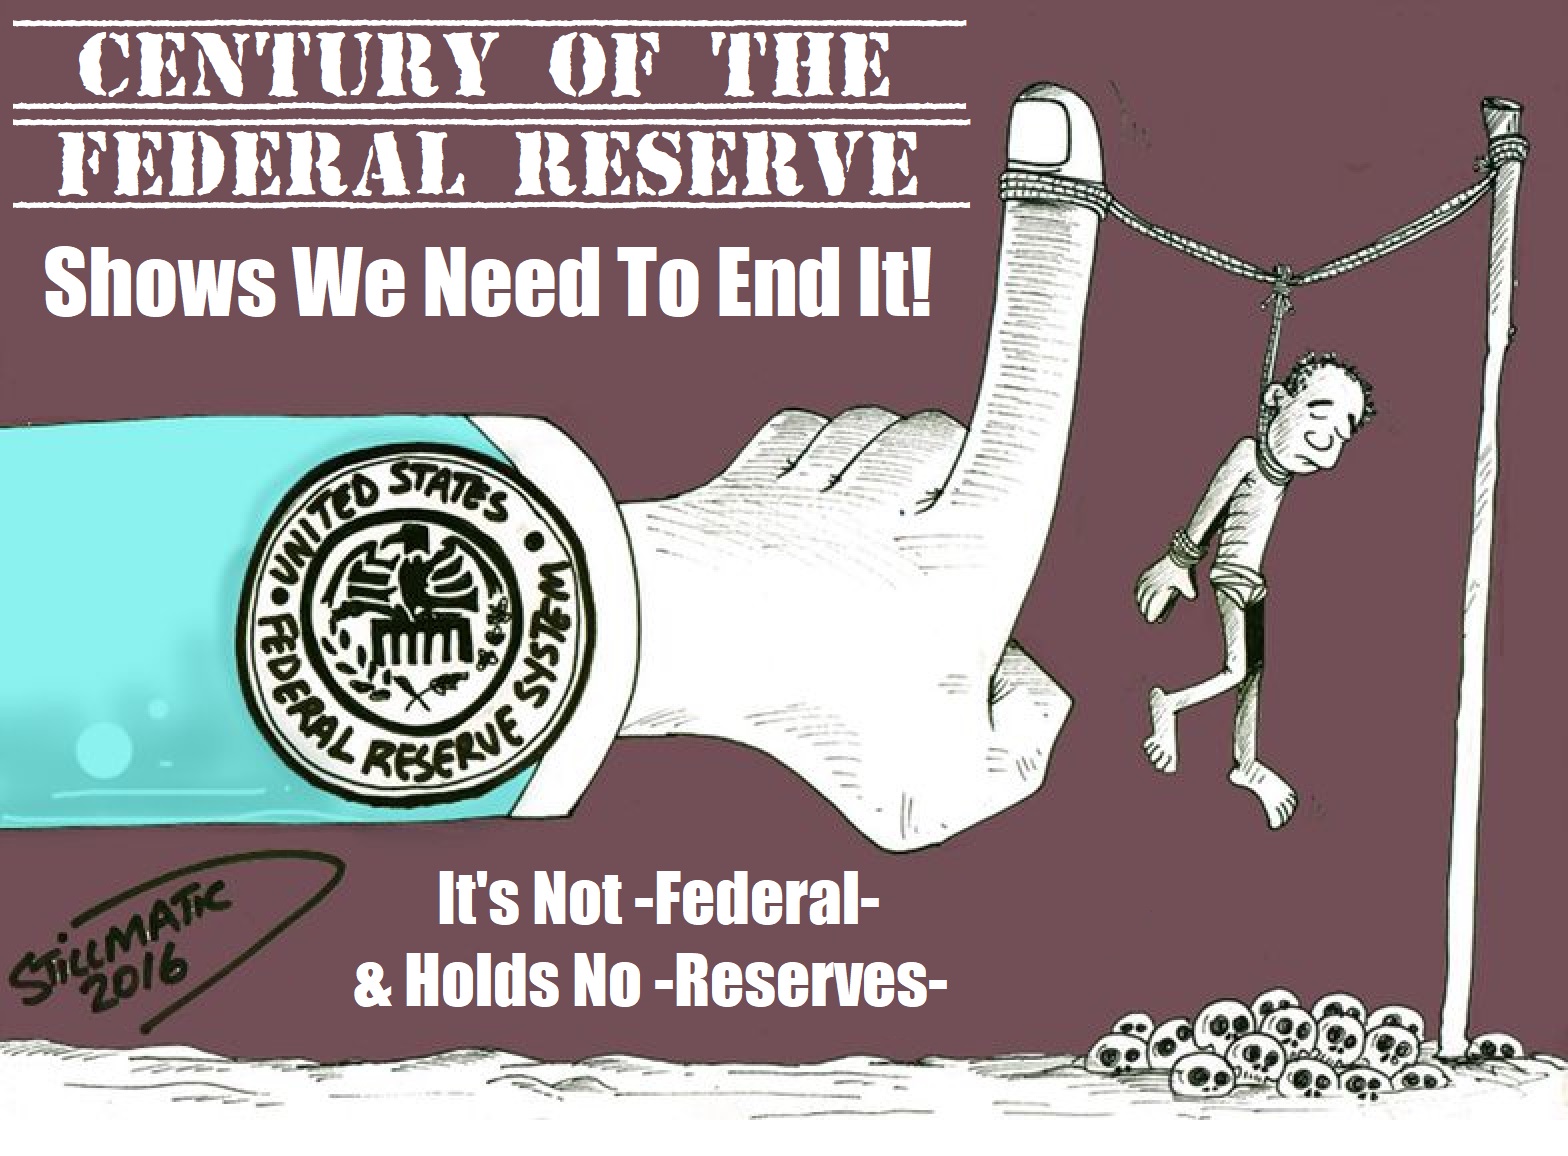 Let's End The Federal Reserve!